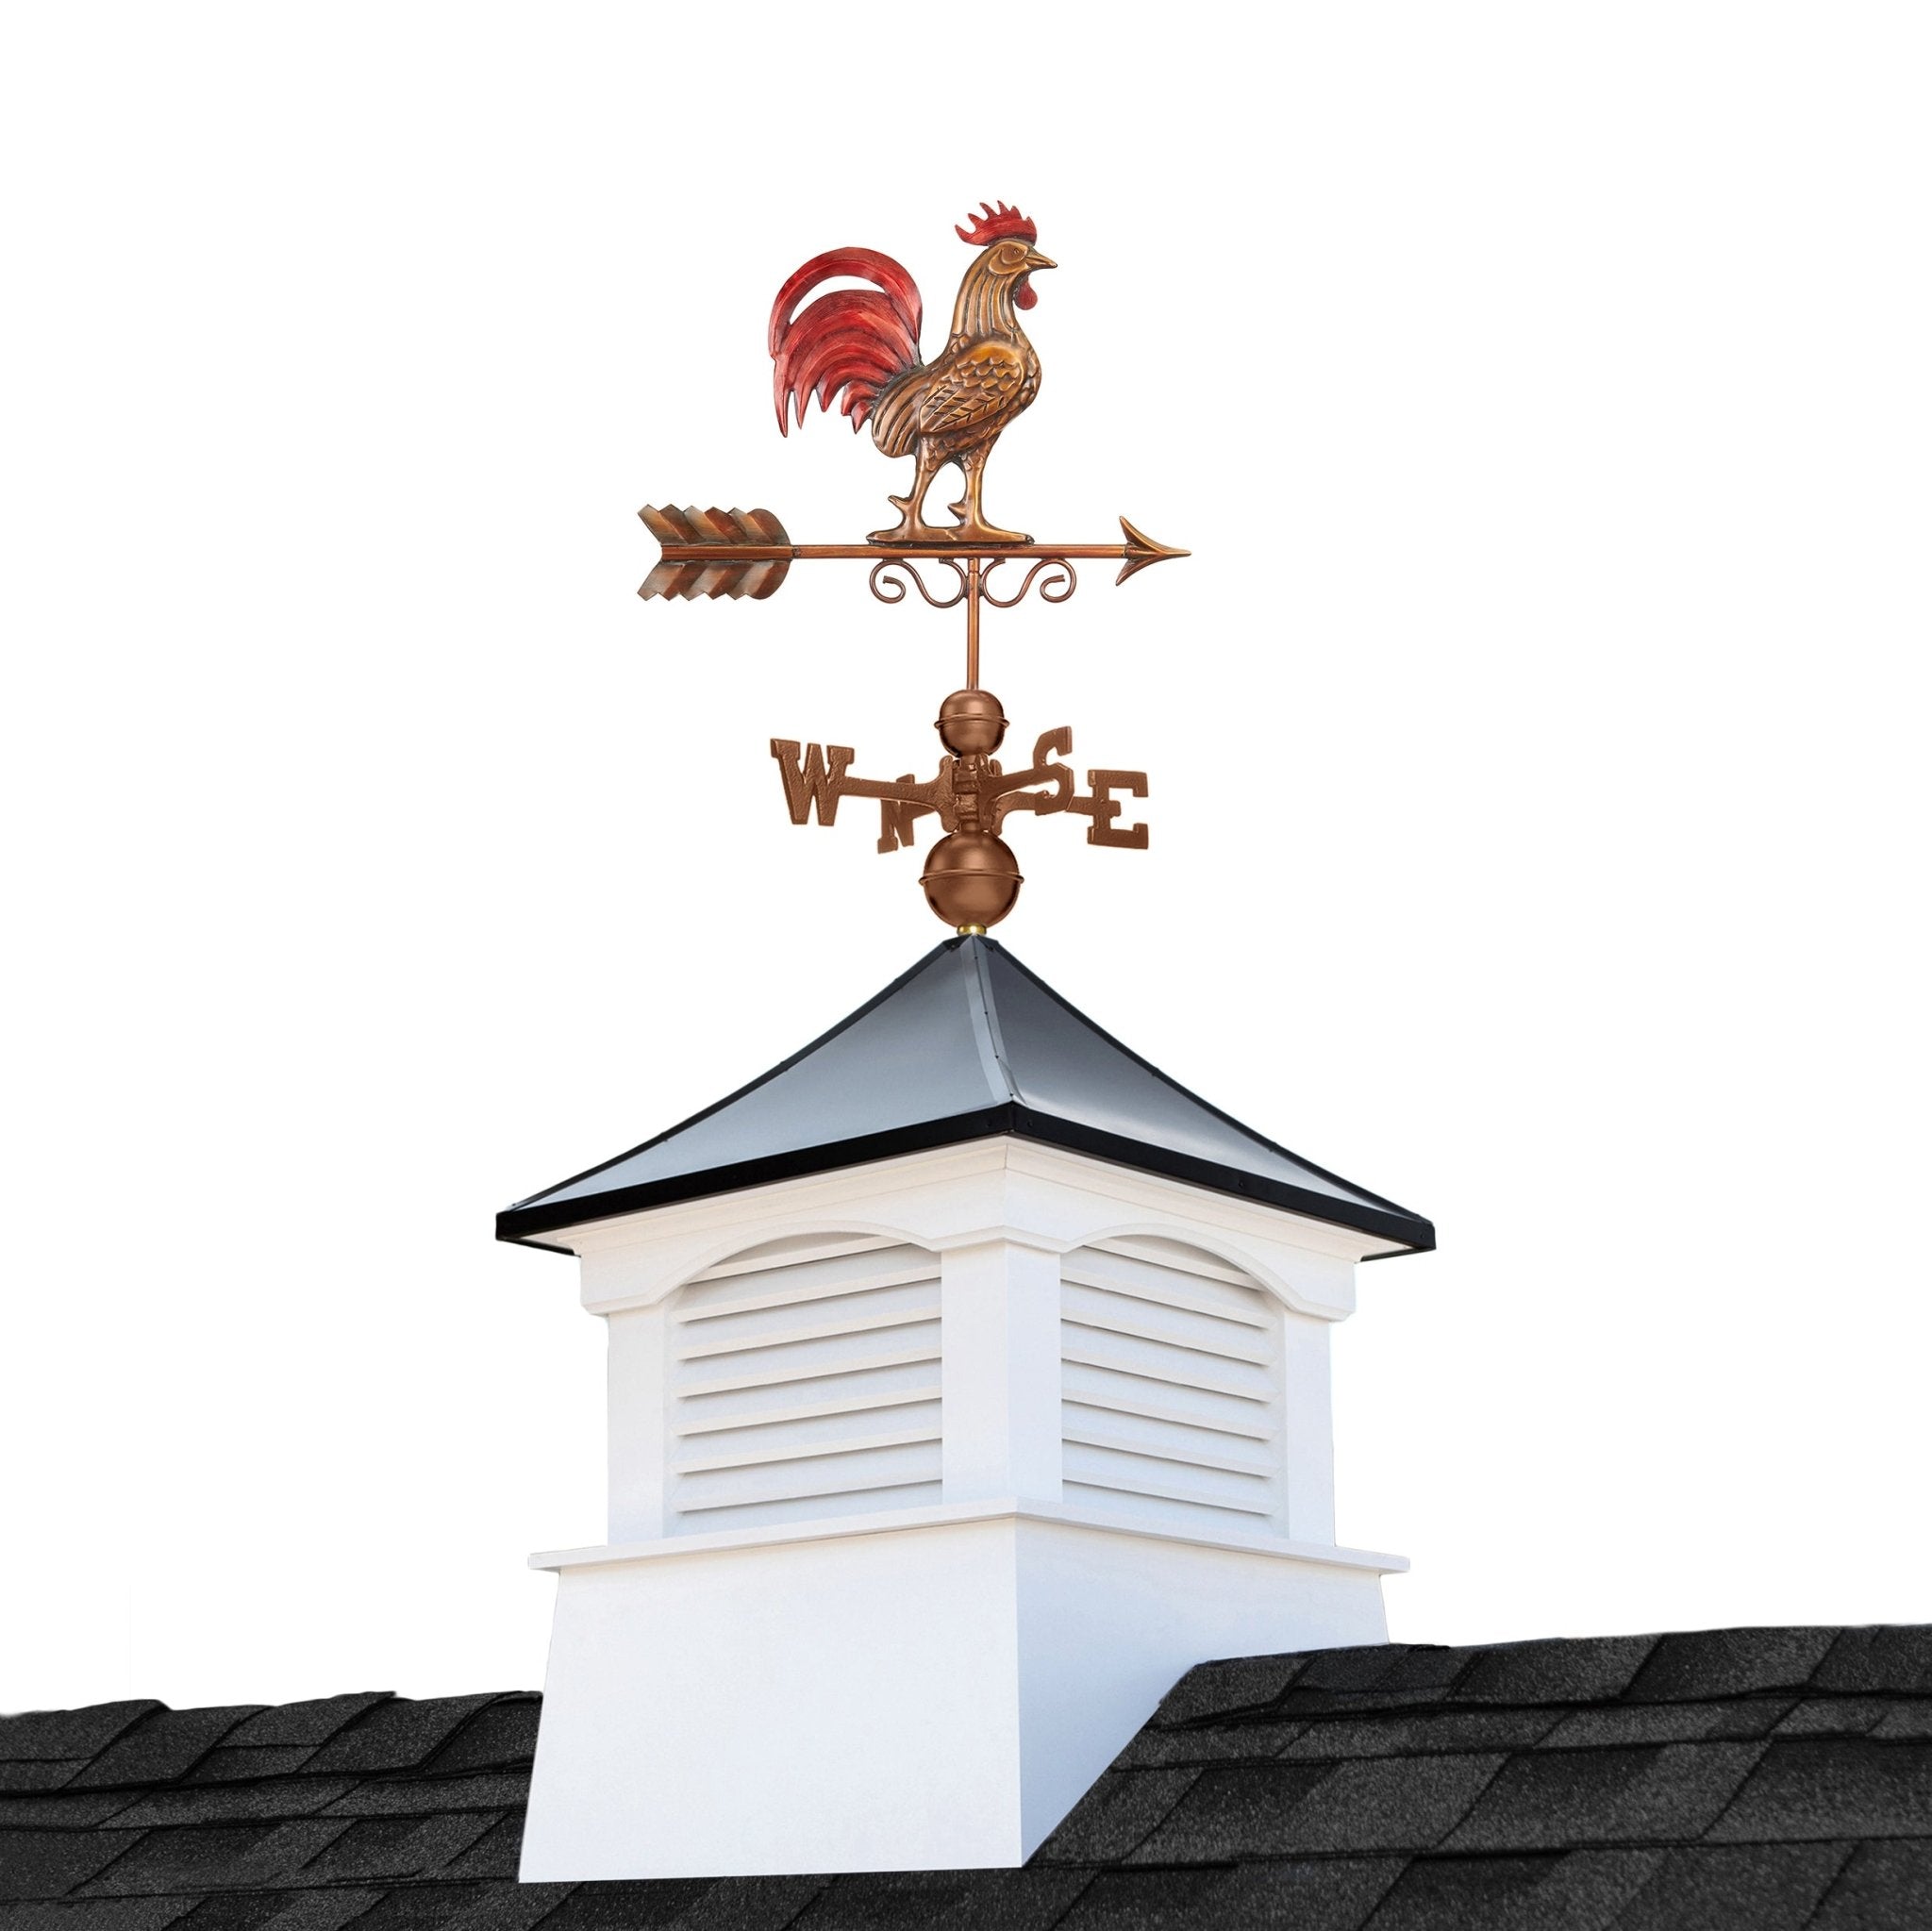 18" Square Coventry Vinyl Cupola with Black Aluminum Roof and Red Rooster Weathervane by Good Directions - Good Directions